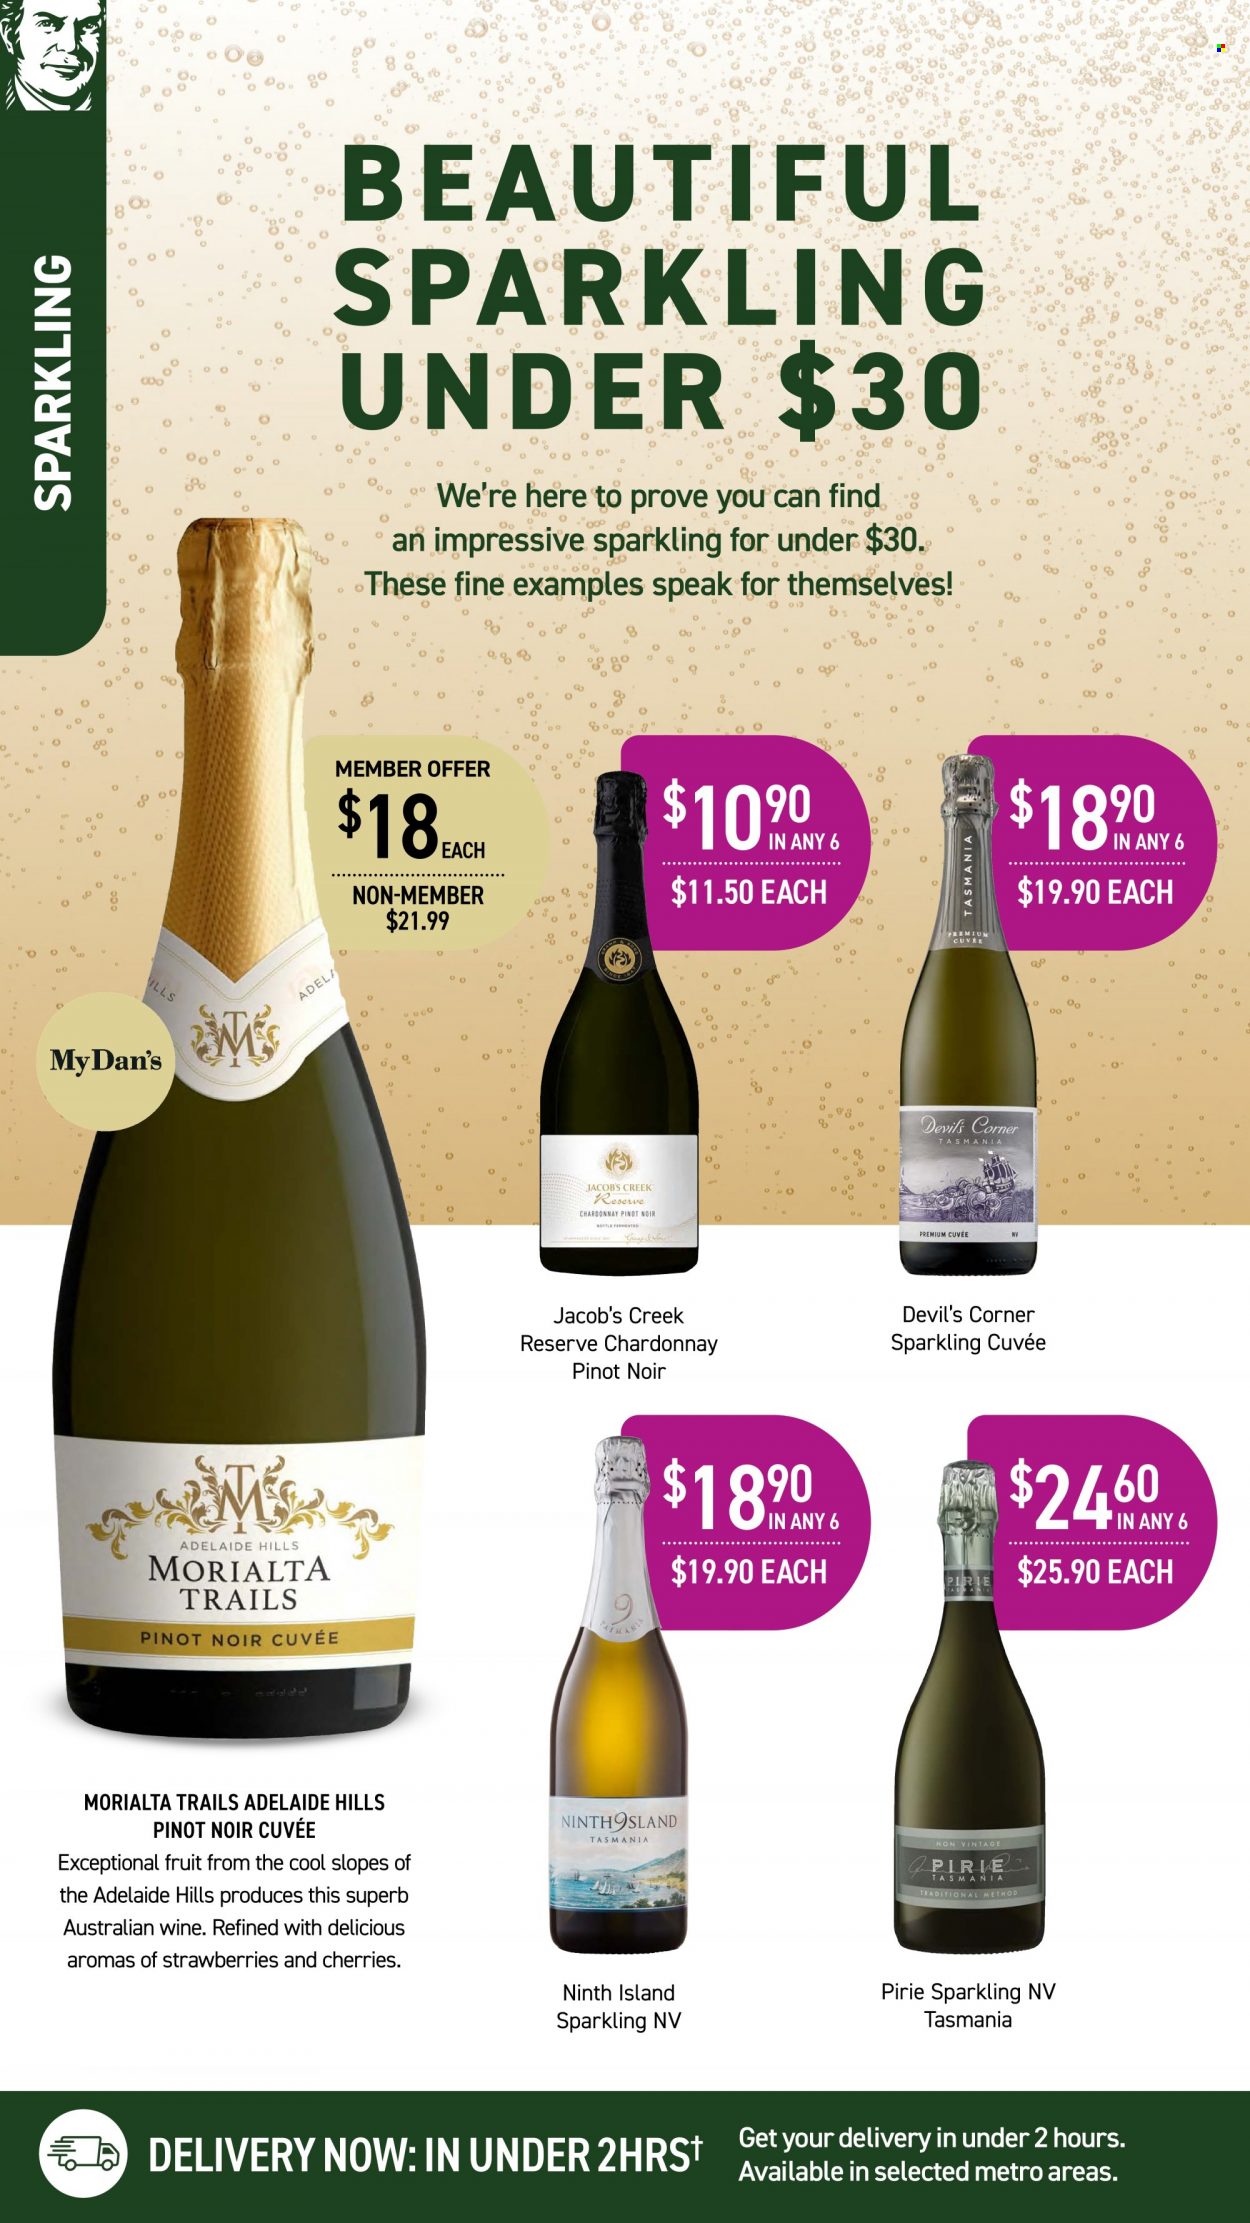 thumbnail - Dan Murphy's Catalogue - 12 May 2022 - 25 May 2022 - Sales products - red wine, white wine, Chardonnay, wine, Pinot Noir, Cuvée, Jacob's Creek. Page 15.